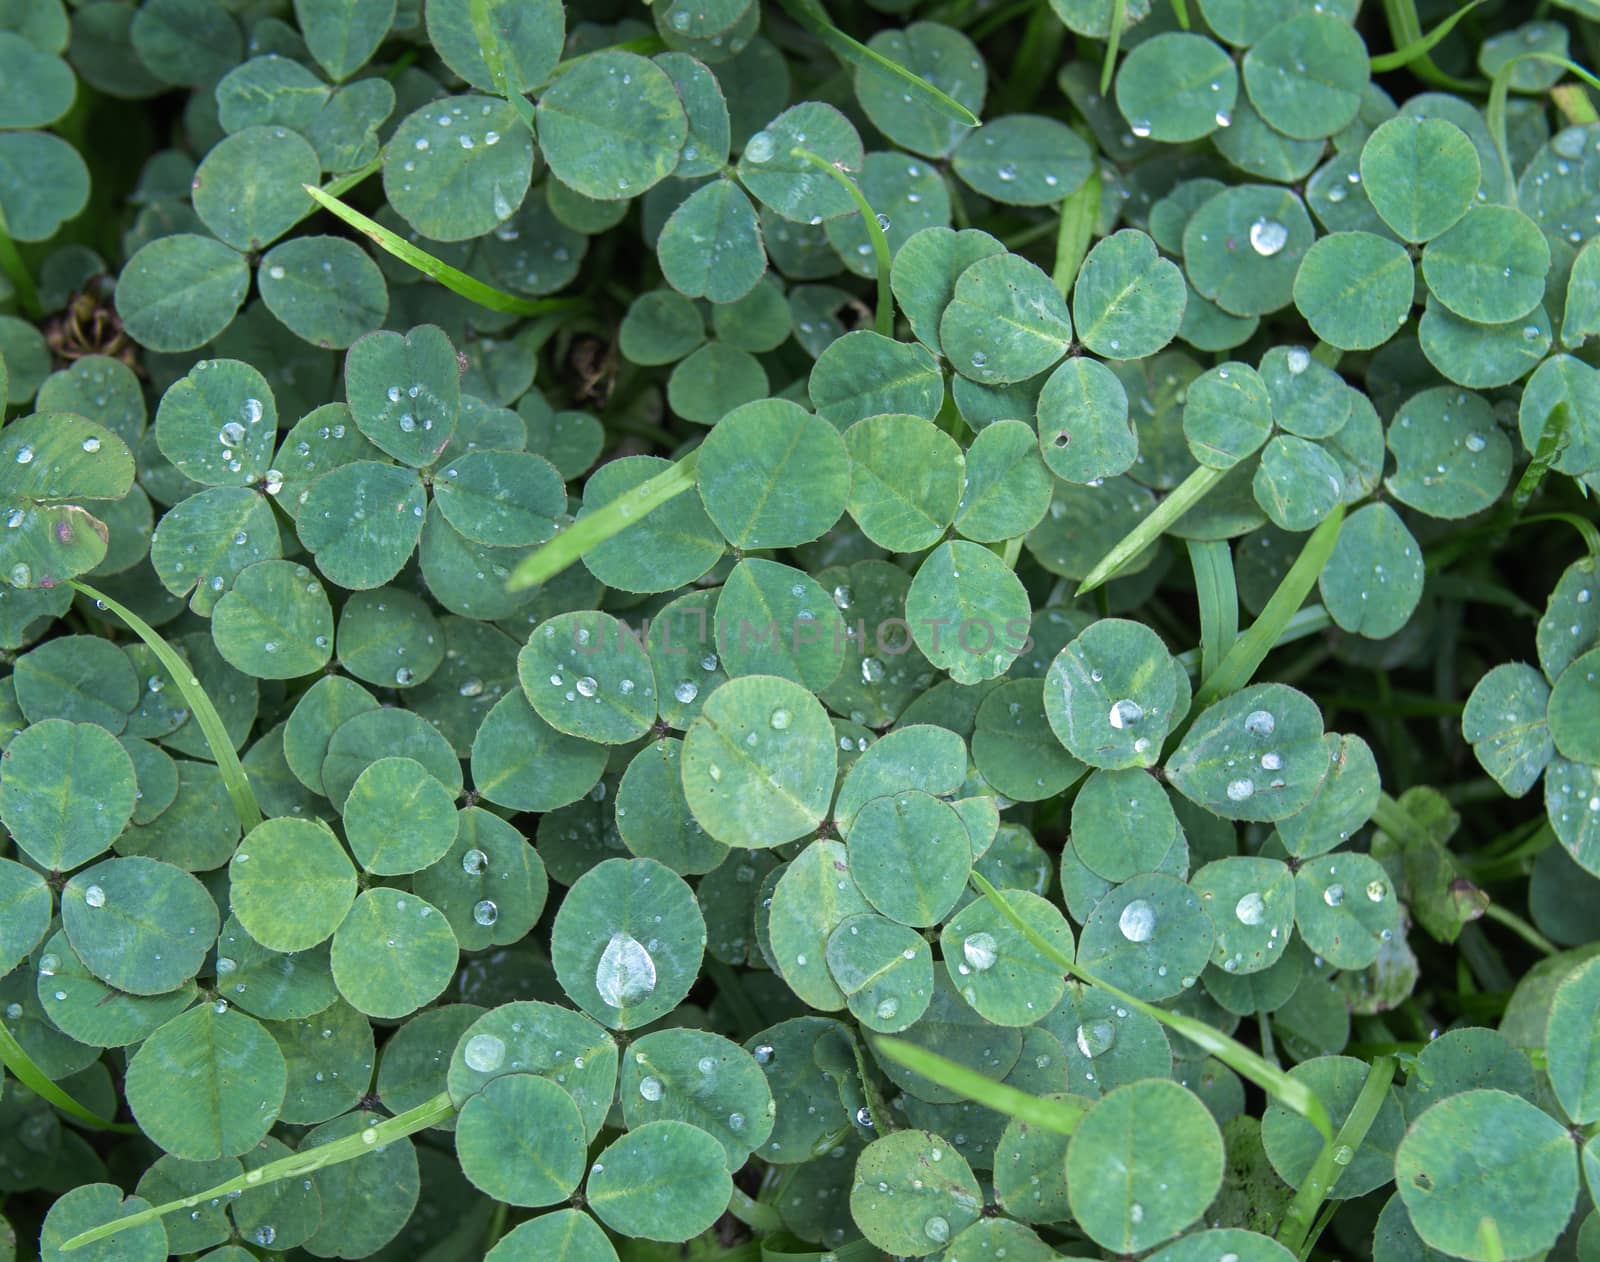 Cool tones green clover or shamrock background with rain drops by weruskak